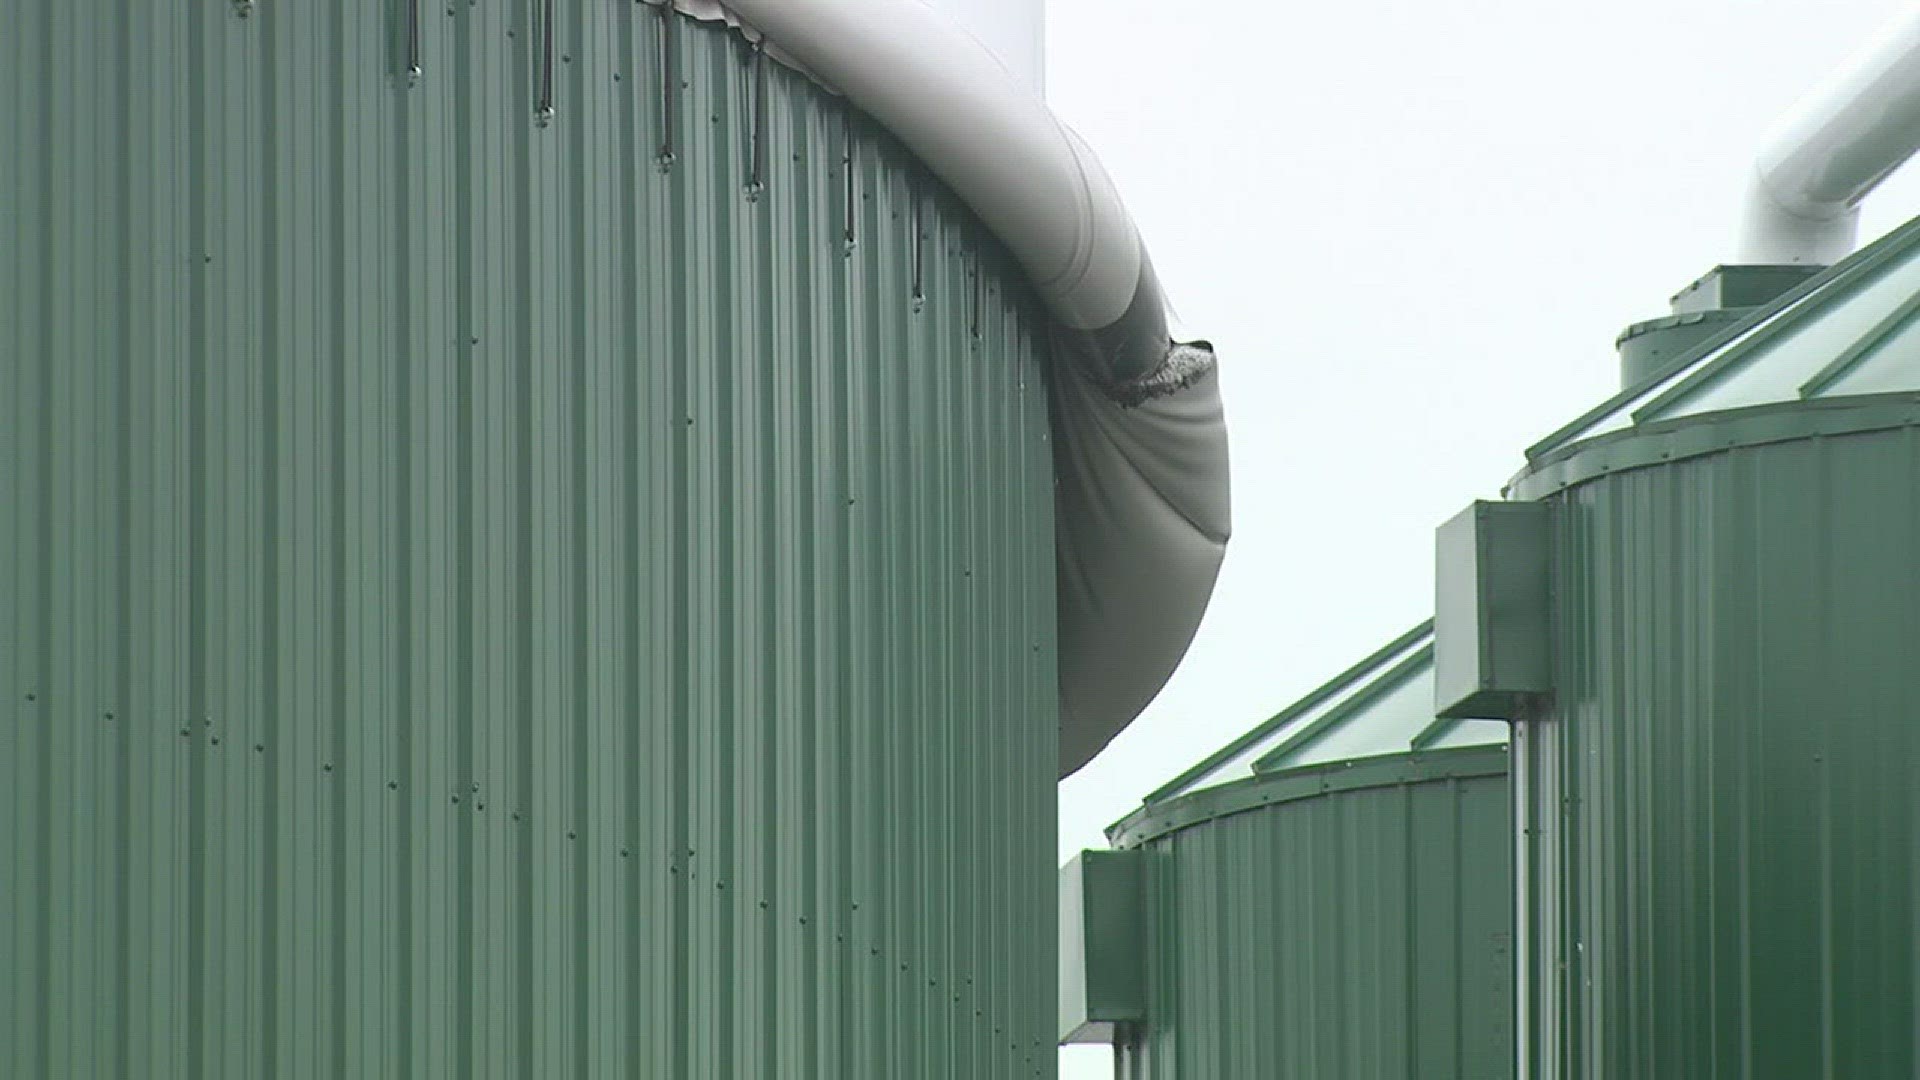 Investigation uncovers new issues at Lowell biodigester